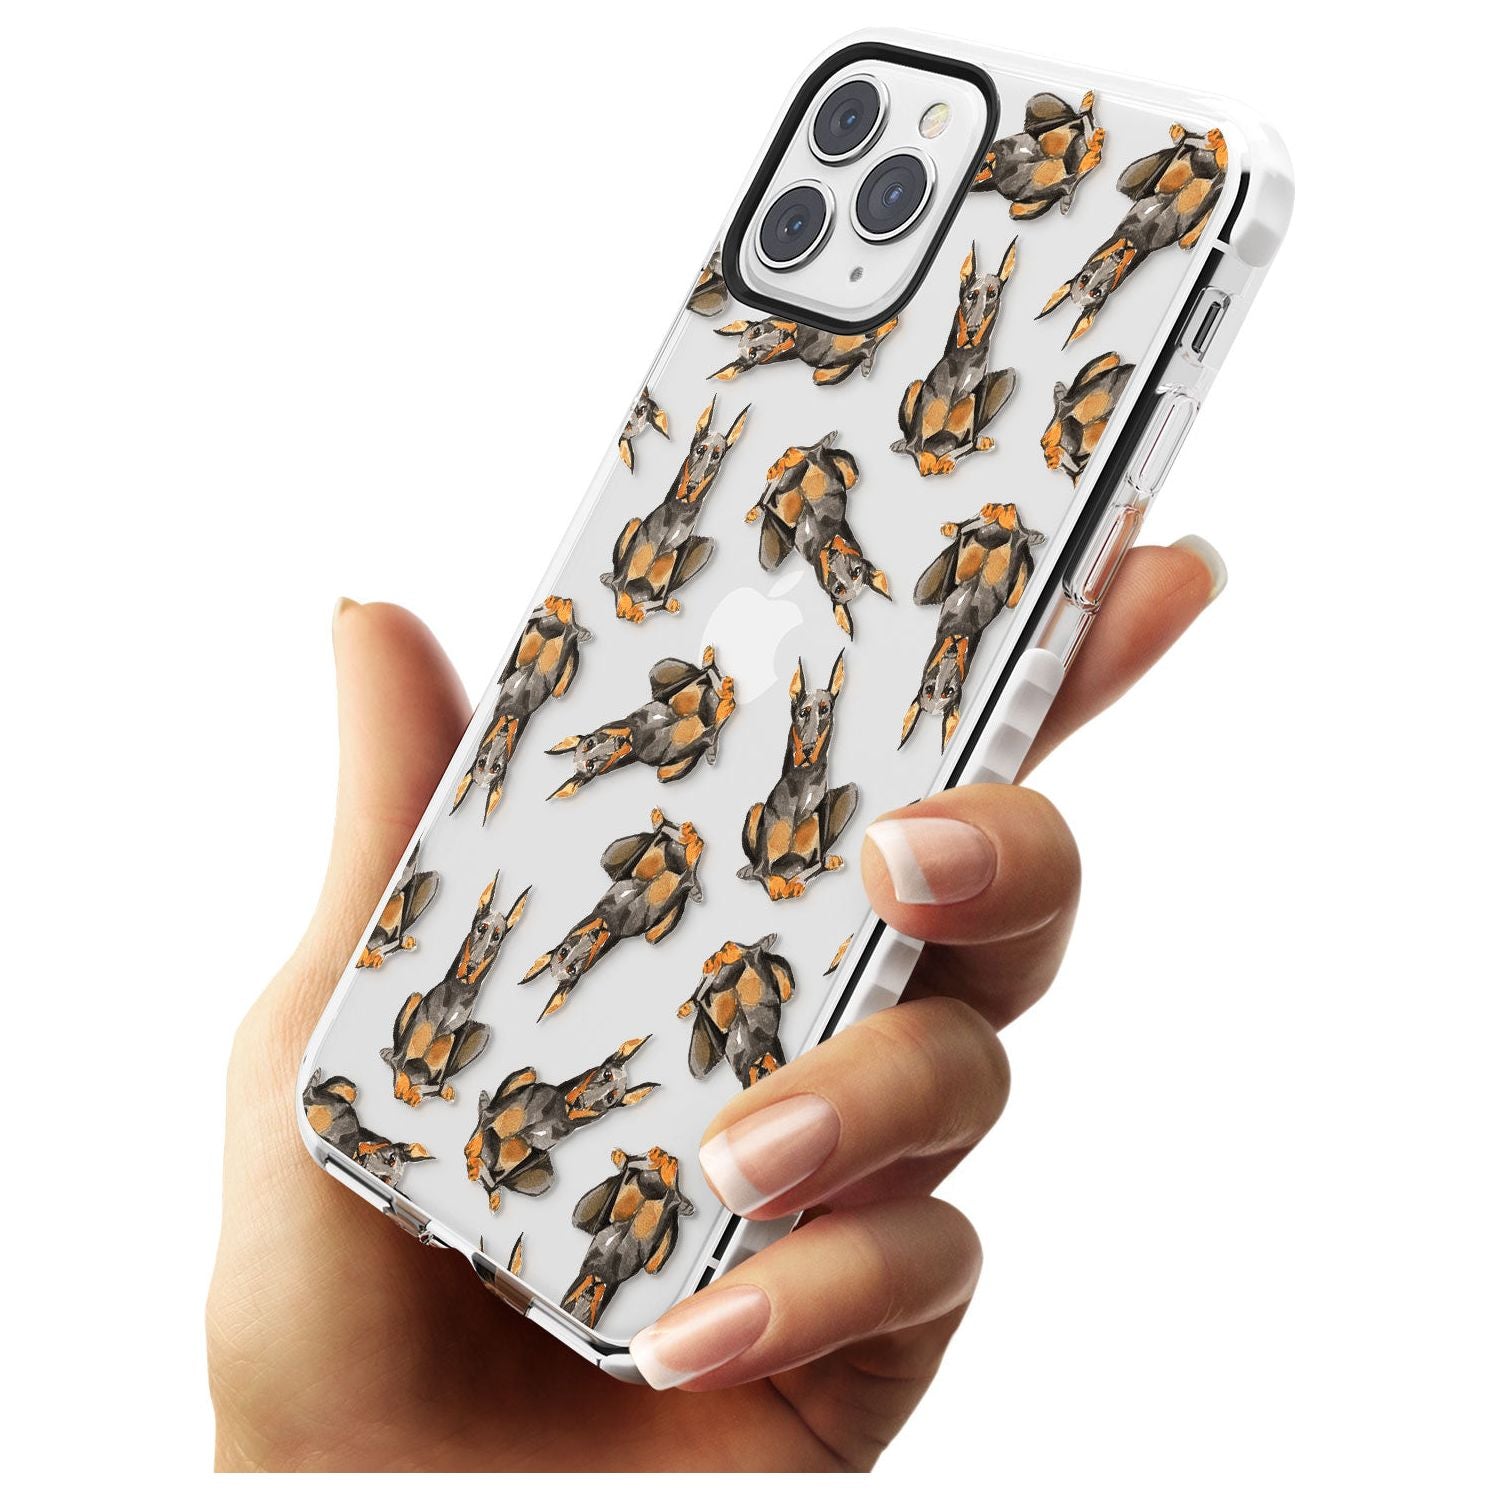 Doberman (Cropped) Watercolour Dog Pattern Impact Phone Case for iPhone 11 Pro Max